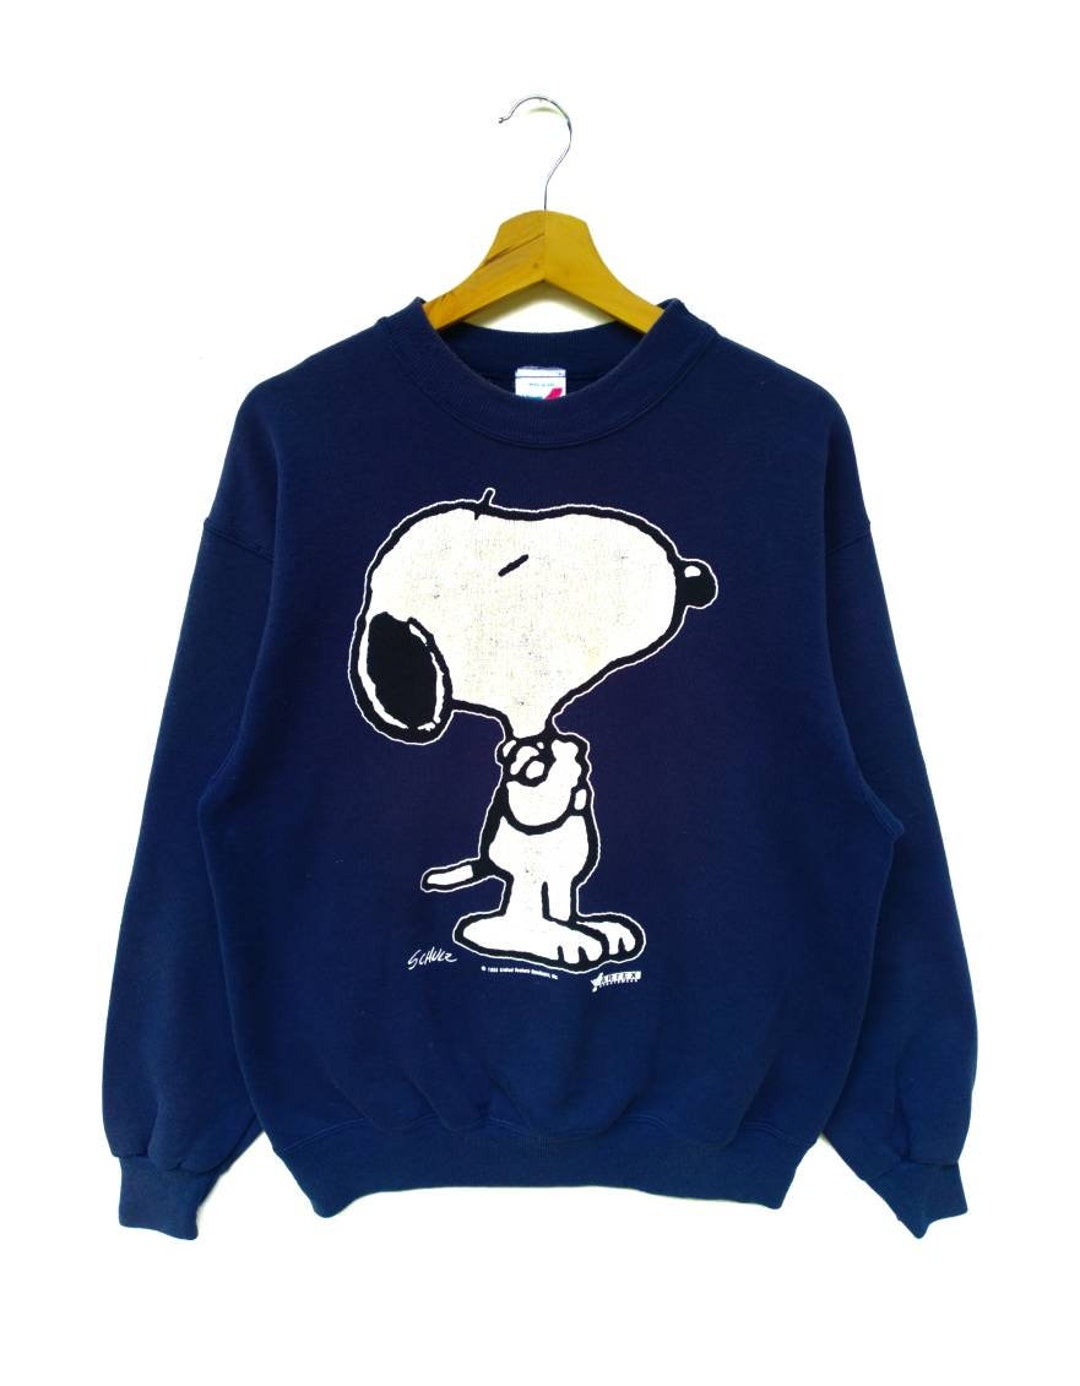 by Artex Etsy Print/made L/dark Vintage Snoopy Sportswear/size Colour/crew Sleeve/pullover/big Blue in Neck/long Sweatshirt/tag Usa/rare 90s -